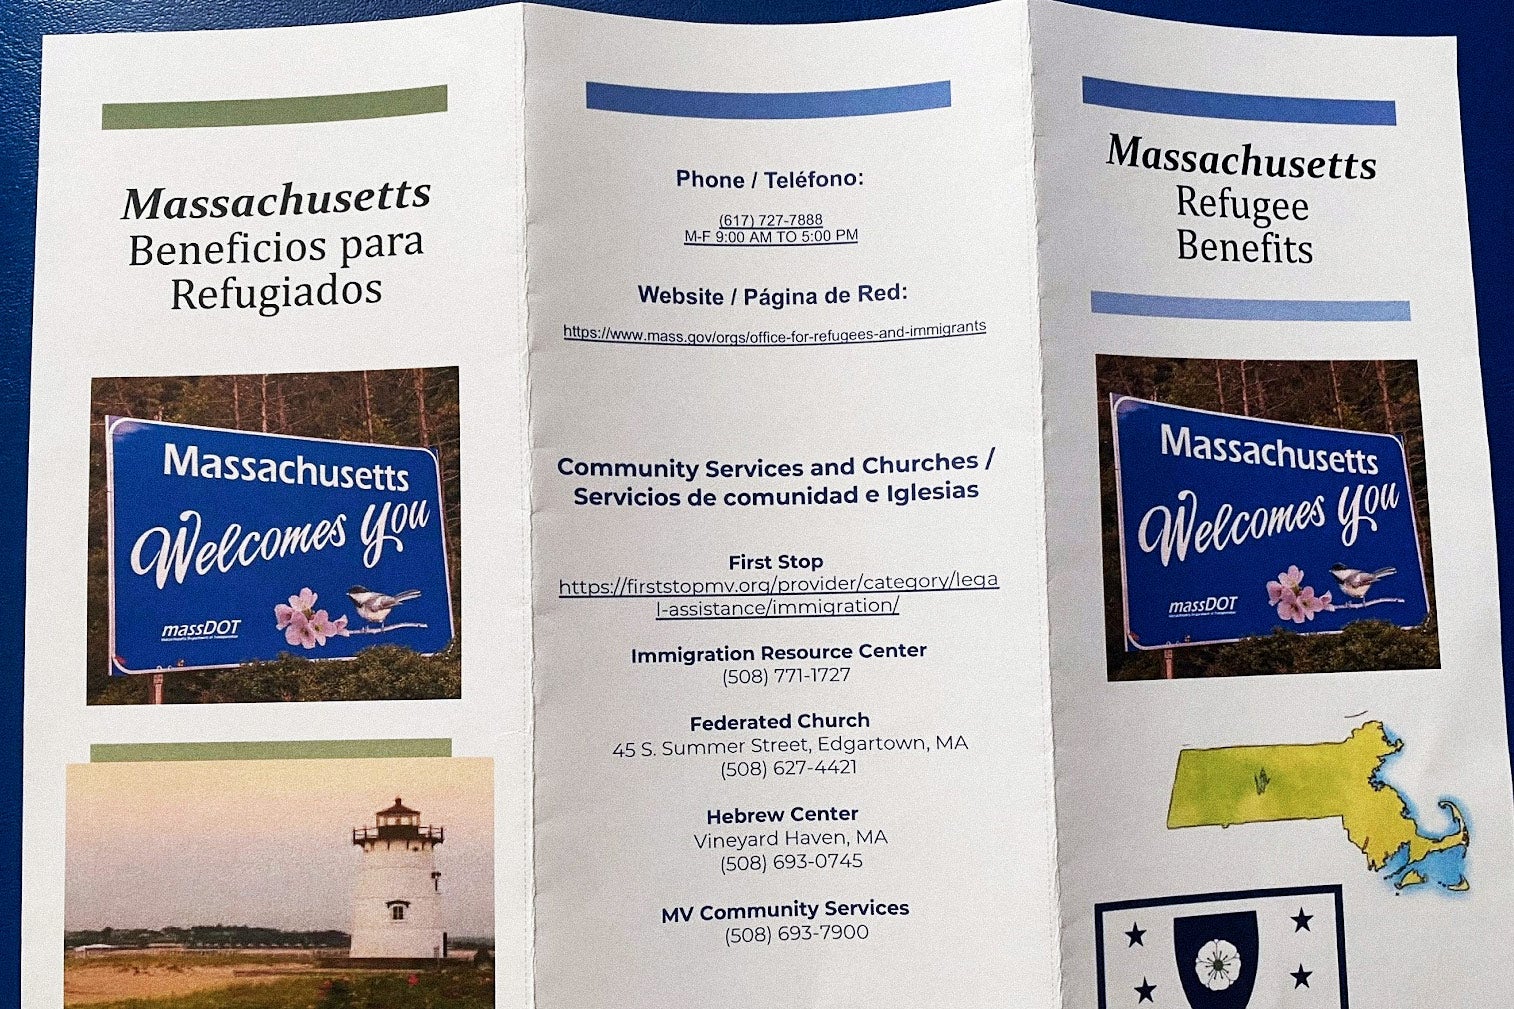 A three-fold pamphlet called Massachusetts Refugee Benefits that appears to be printed on low-quality paper.